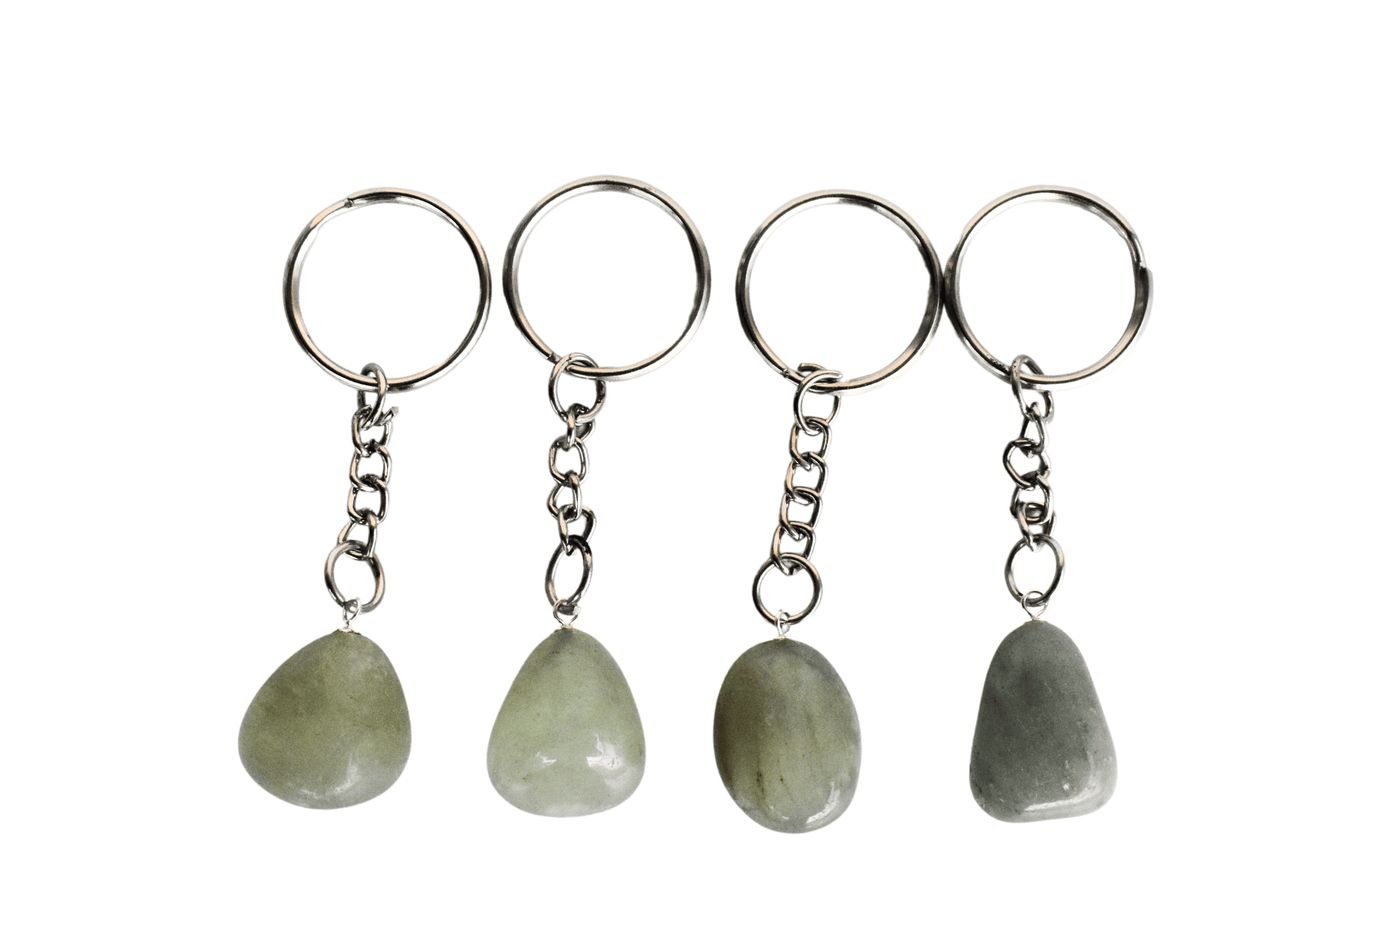 Green Aventurine Key Chain, Gemstone Keychain Crystal Key Ring (Attraction and Cleansing)